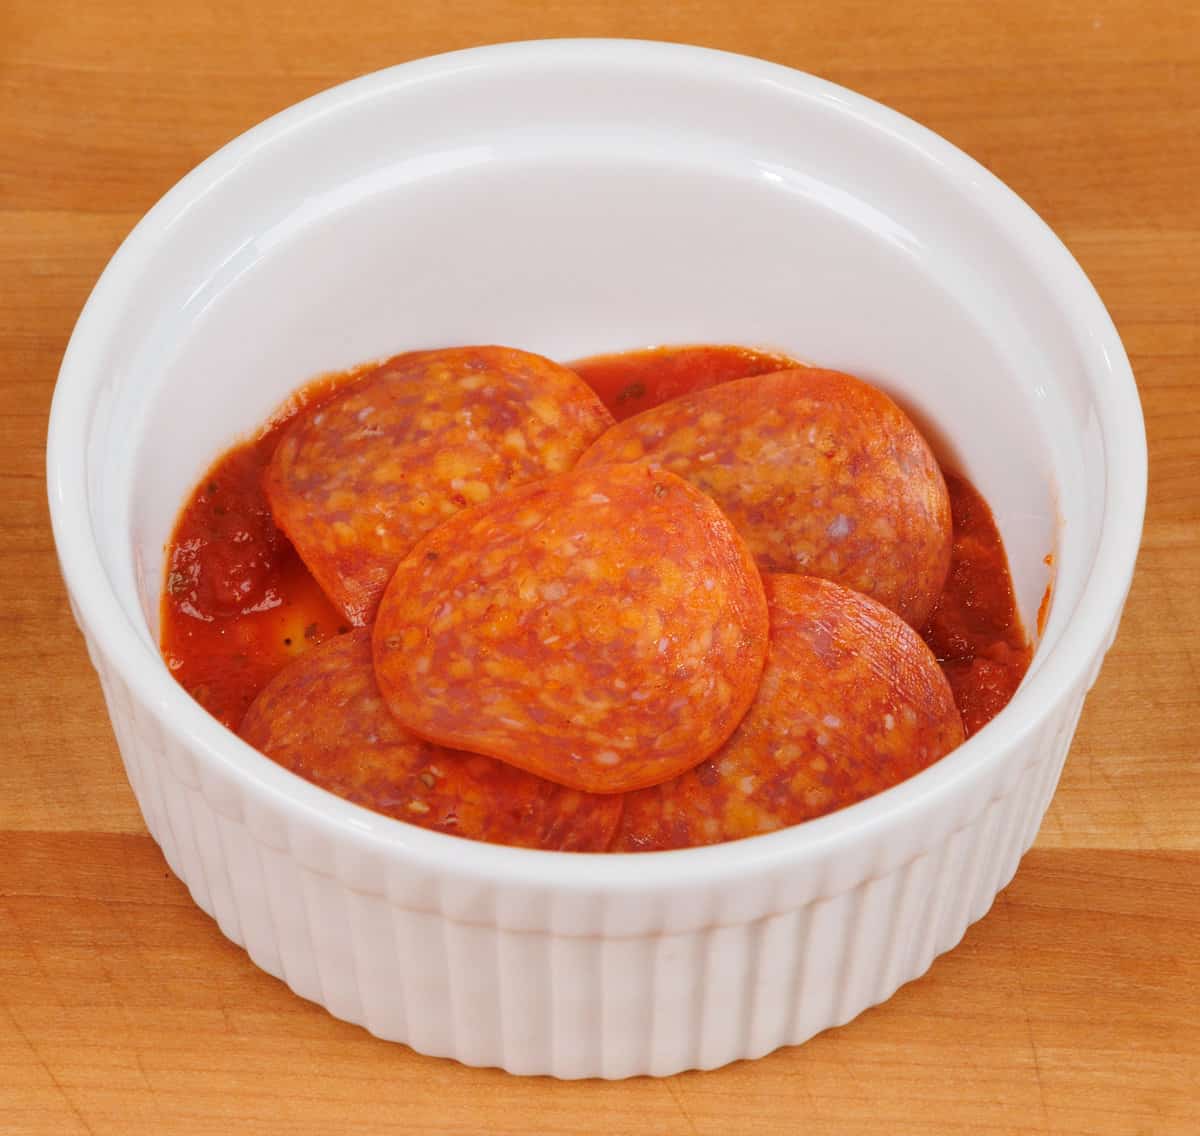 5 slices of pepperoni on the bottom of a small white dish